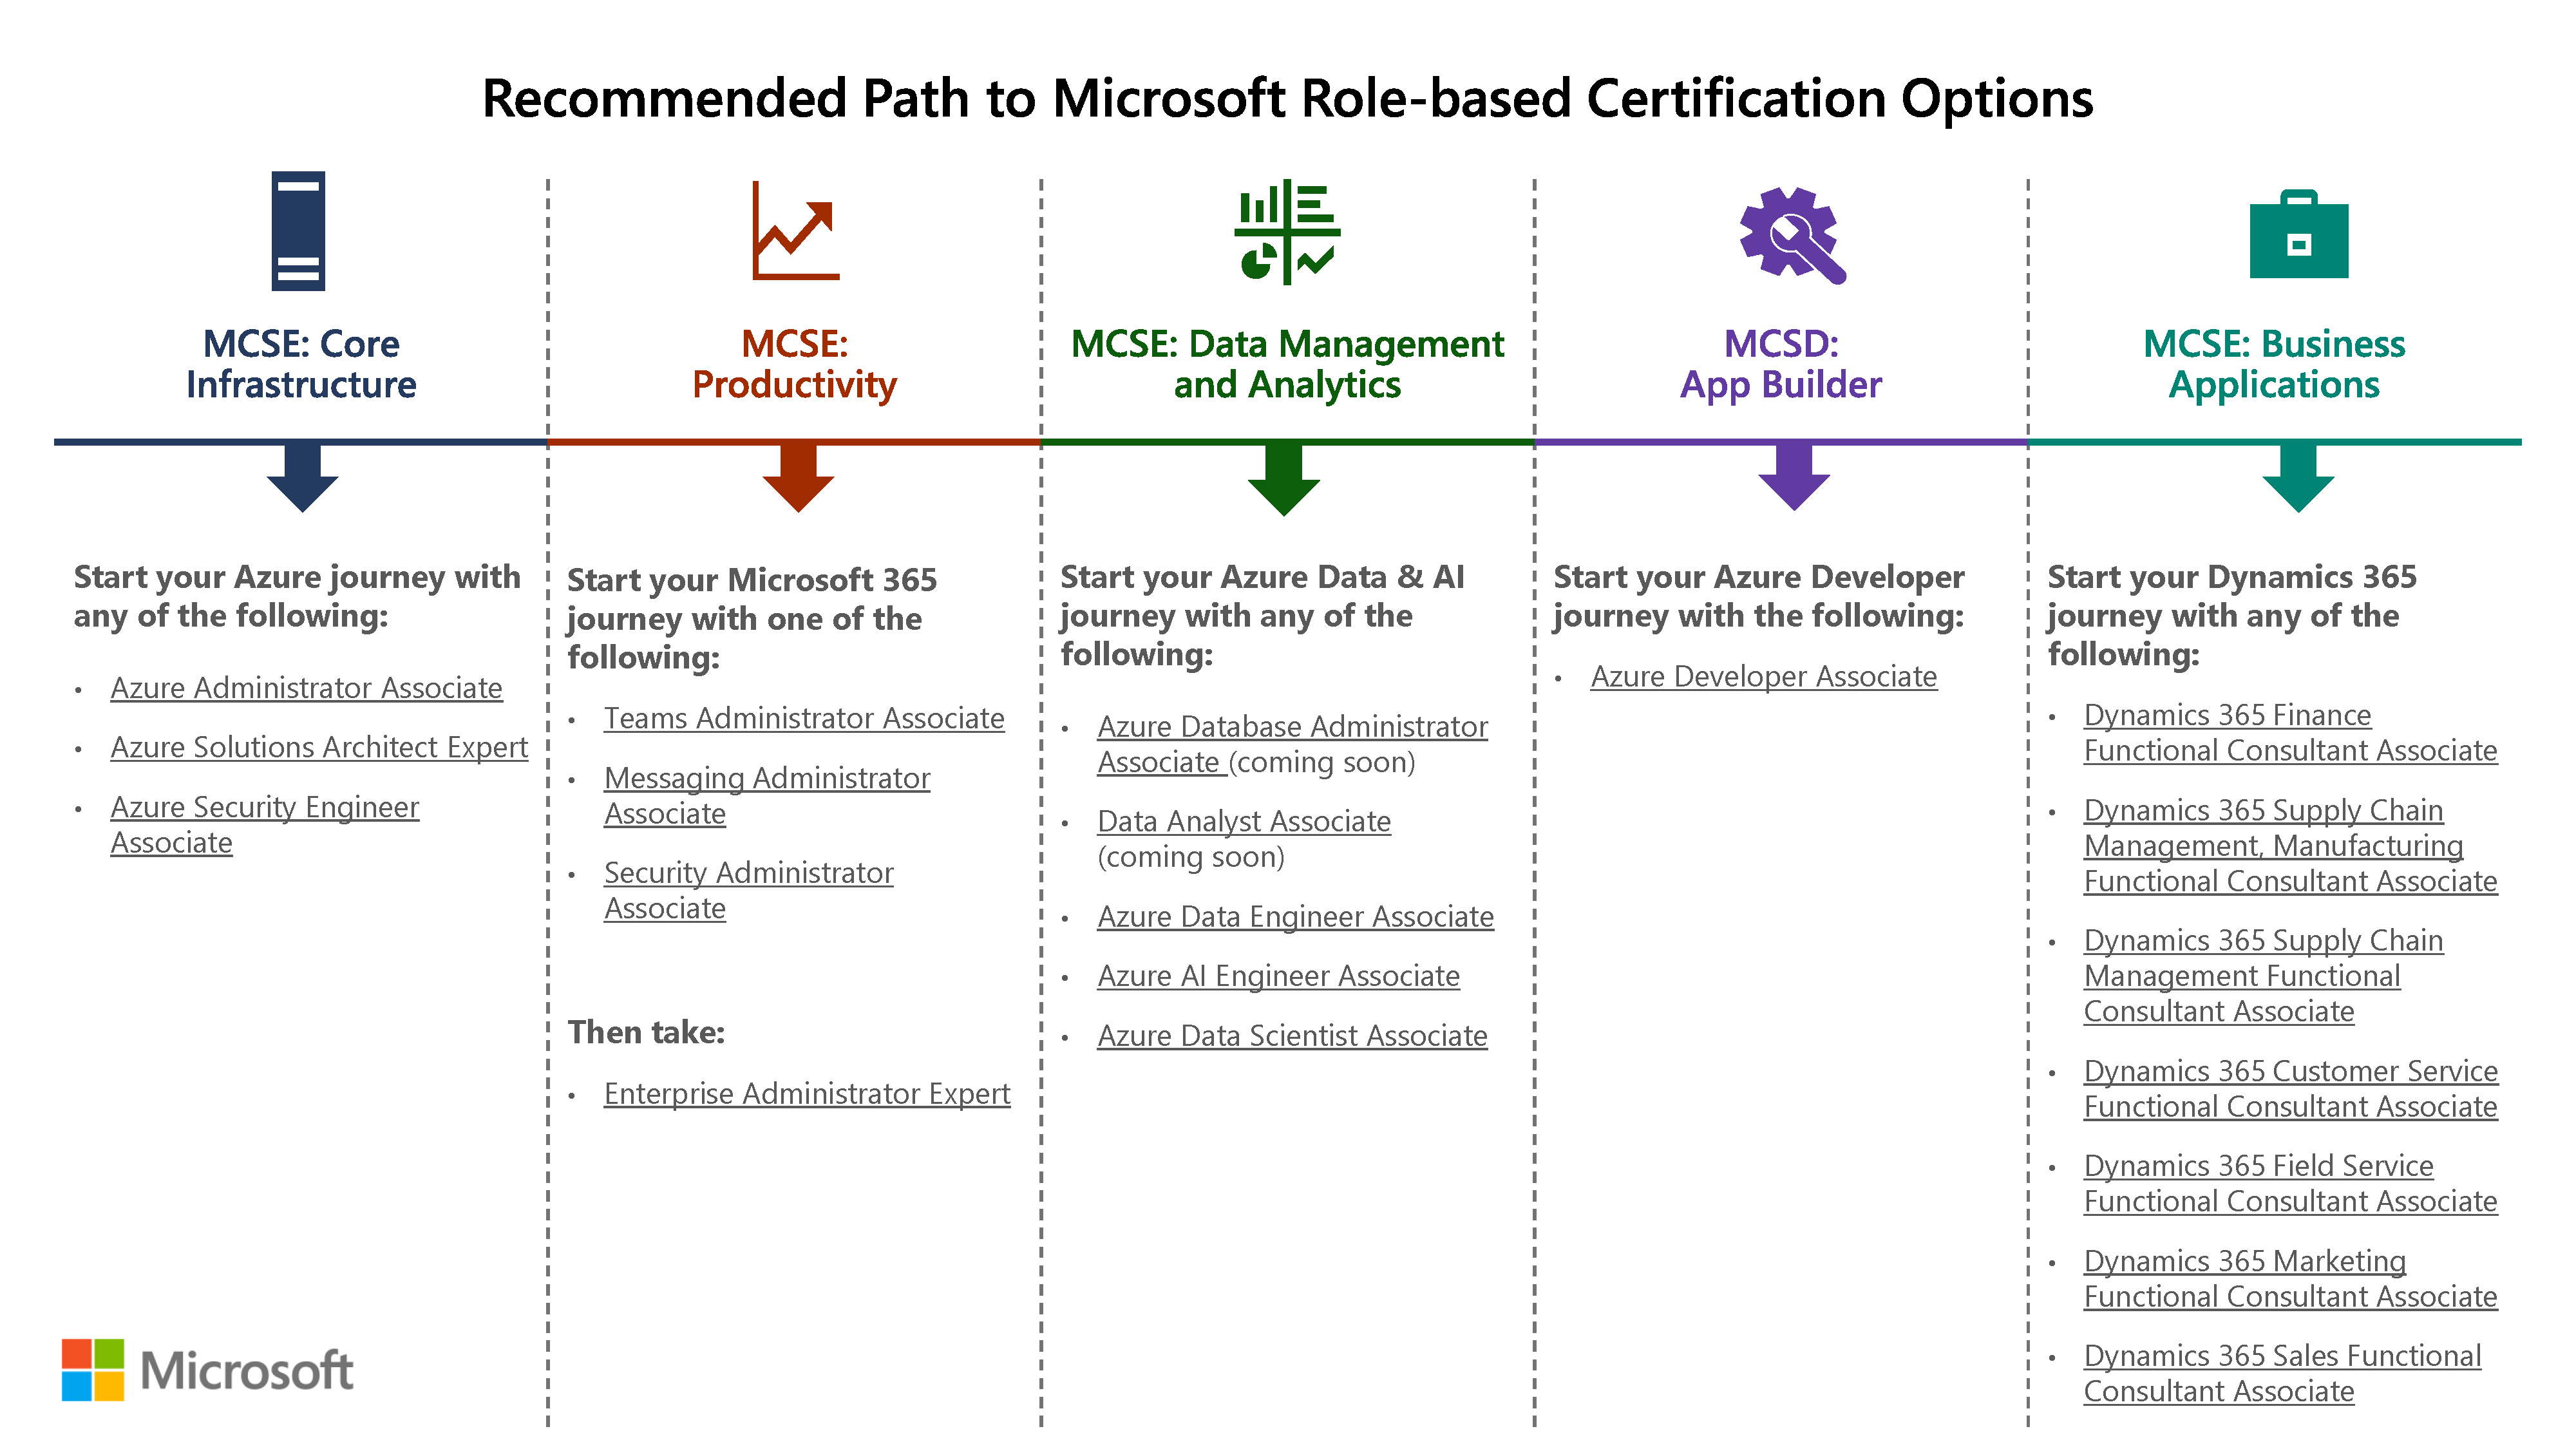 Recommended Path to Microsoft Role-based Certification Options